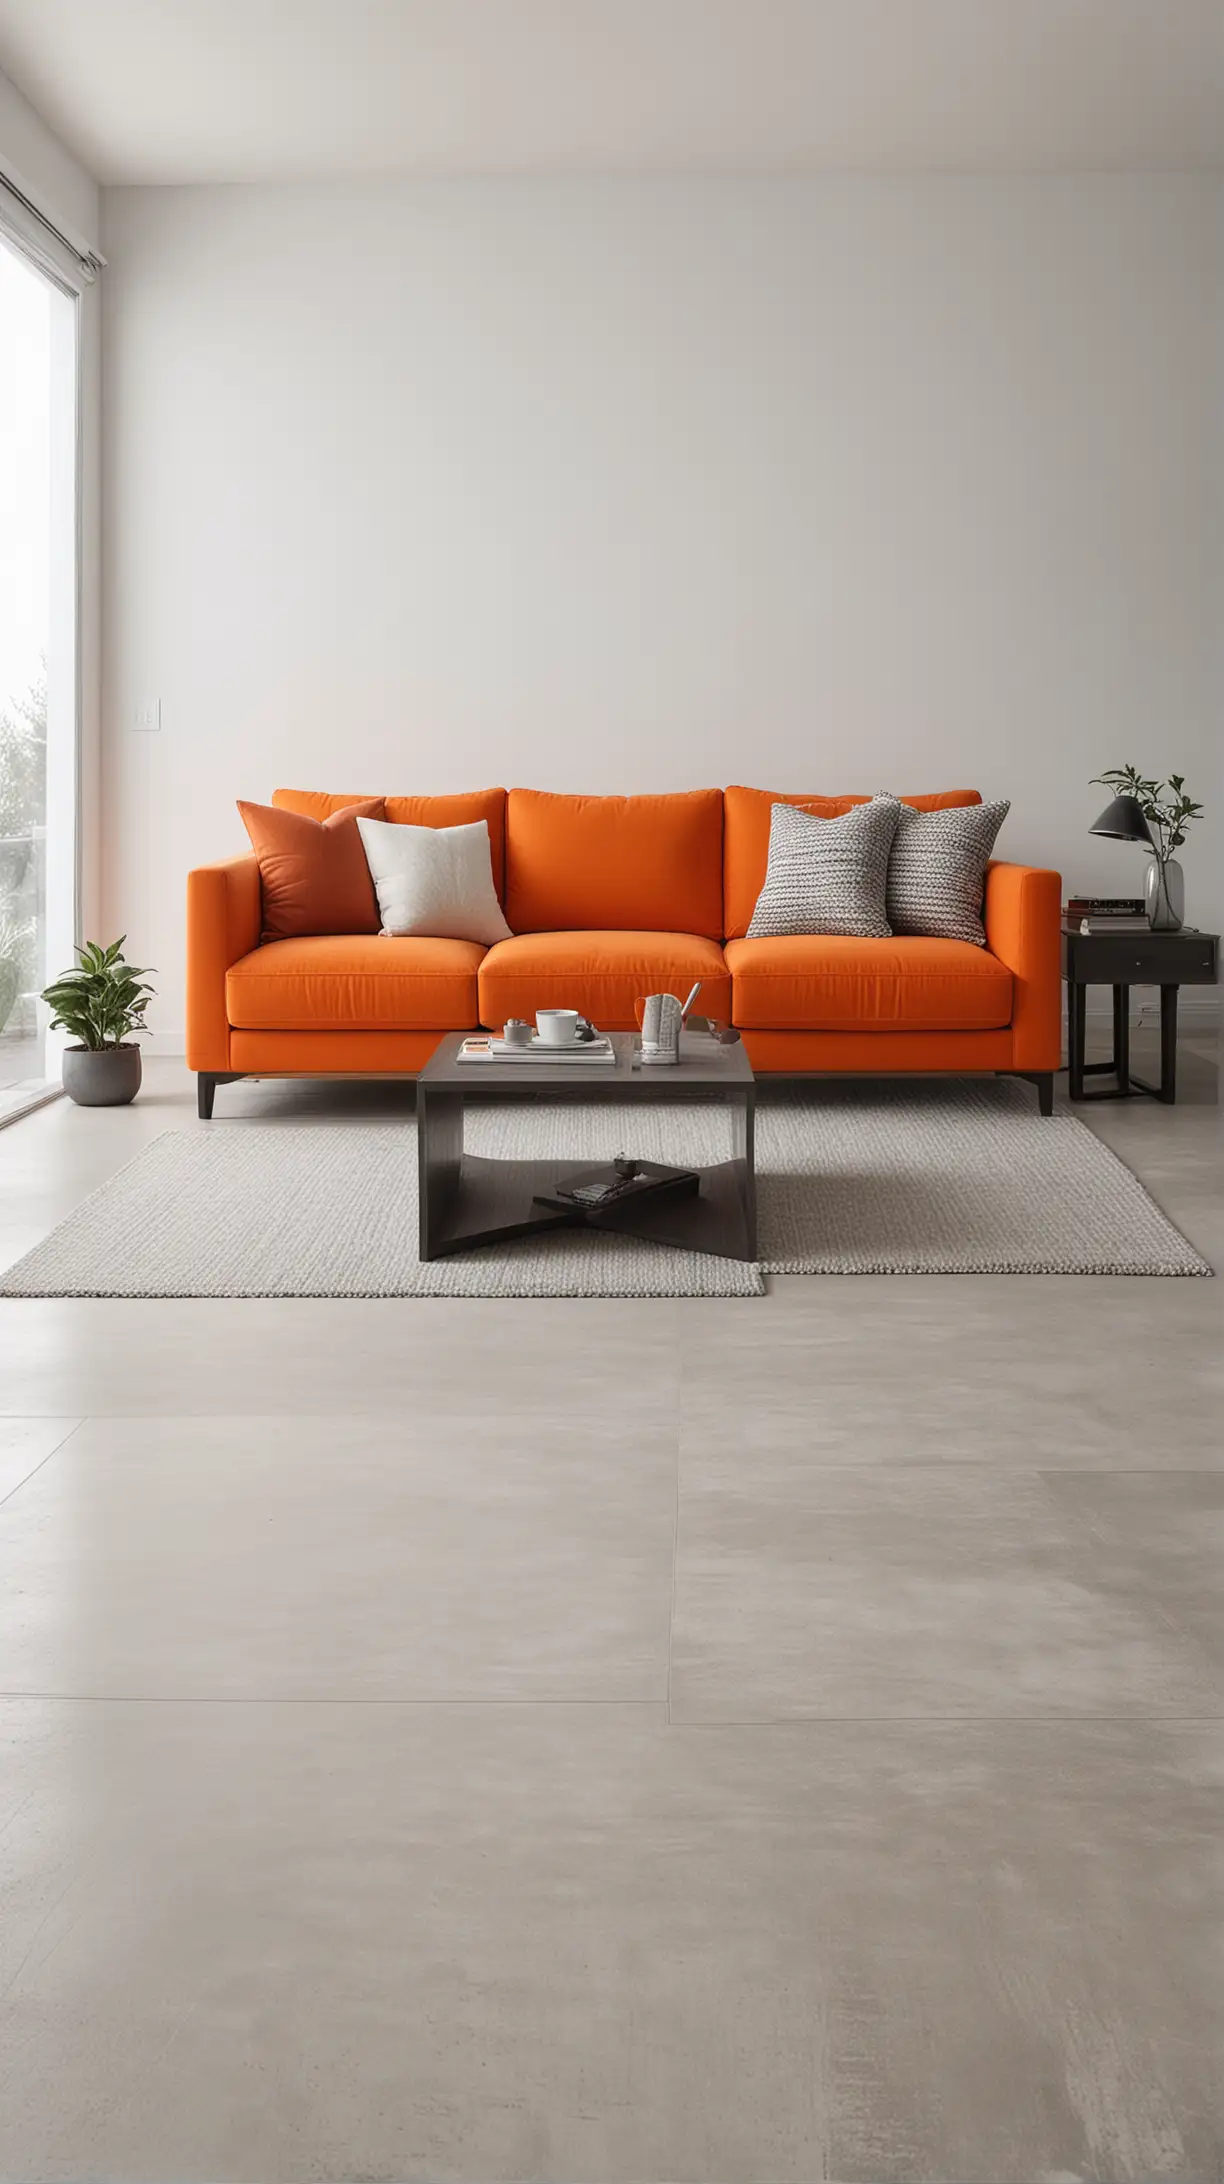 A minimalist living room featuring an orange couch, white walls, grey accents, and sleek, modern furniture. Include subtle textures and clean lines, emphasizing simplicity and elegance.